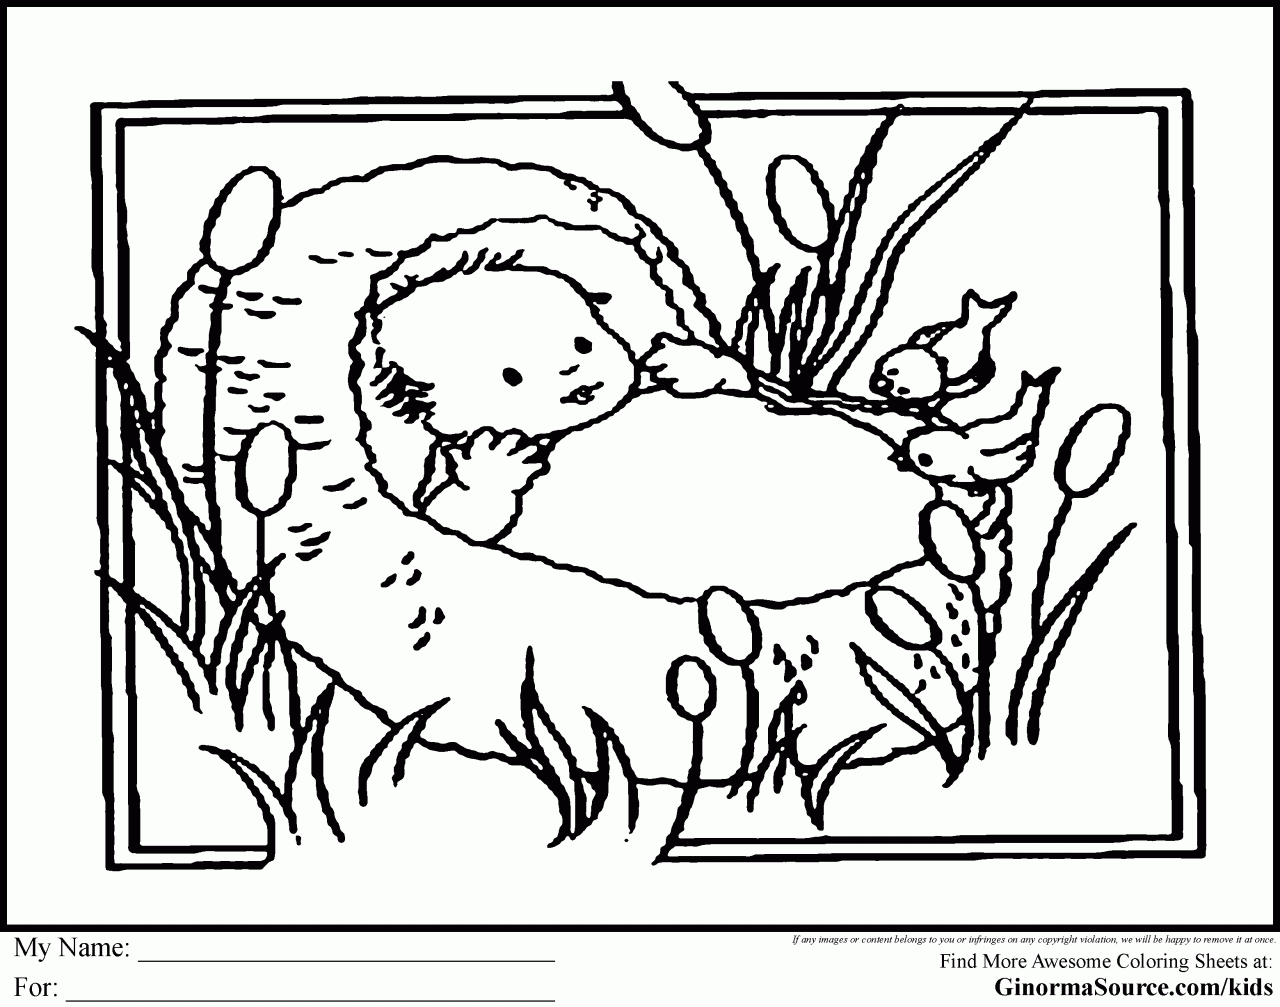 Moses Coloring Pages For Toddlers